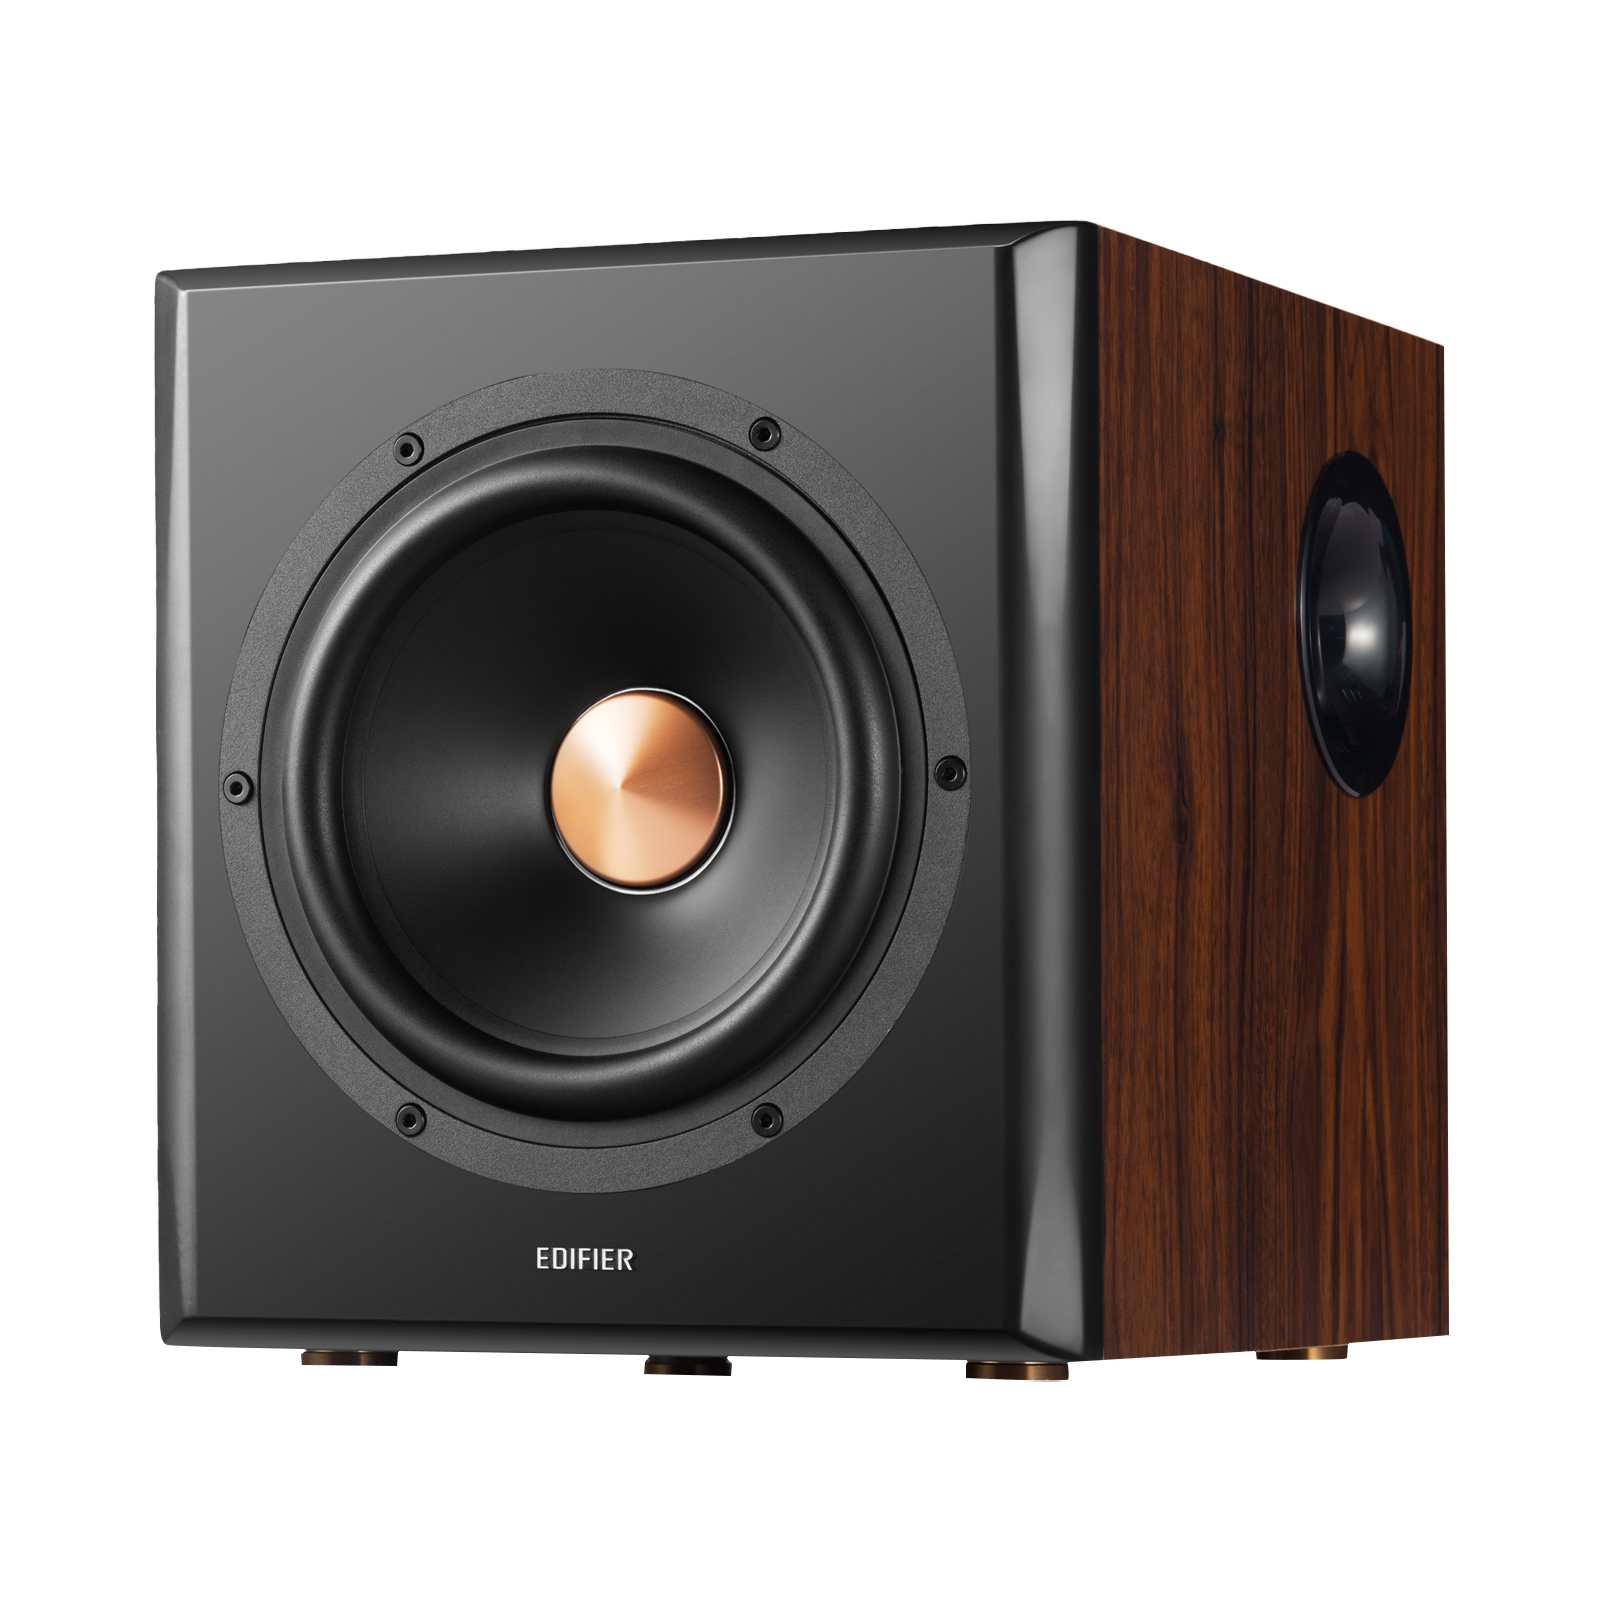 S360DB Hi-Res Audio with wireless subwoofer